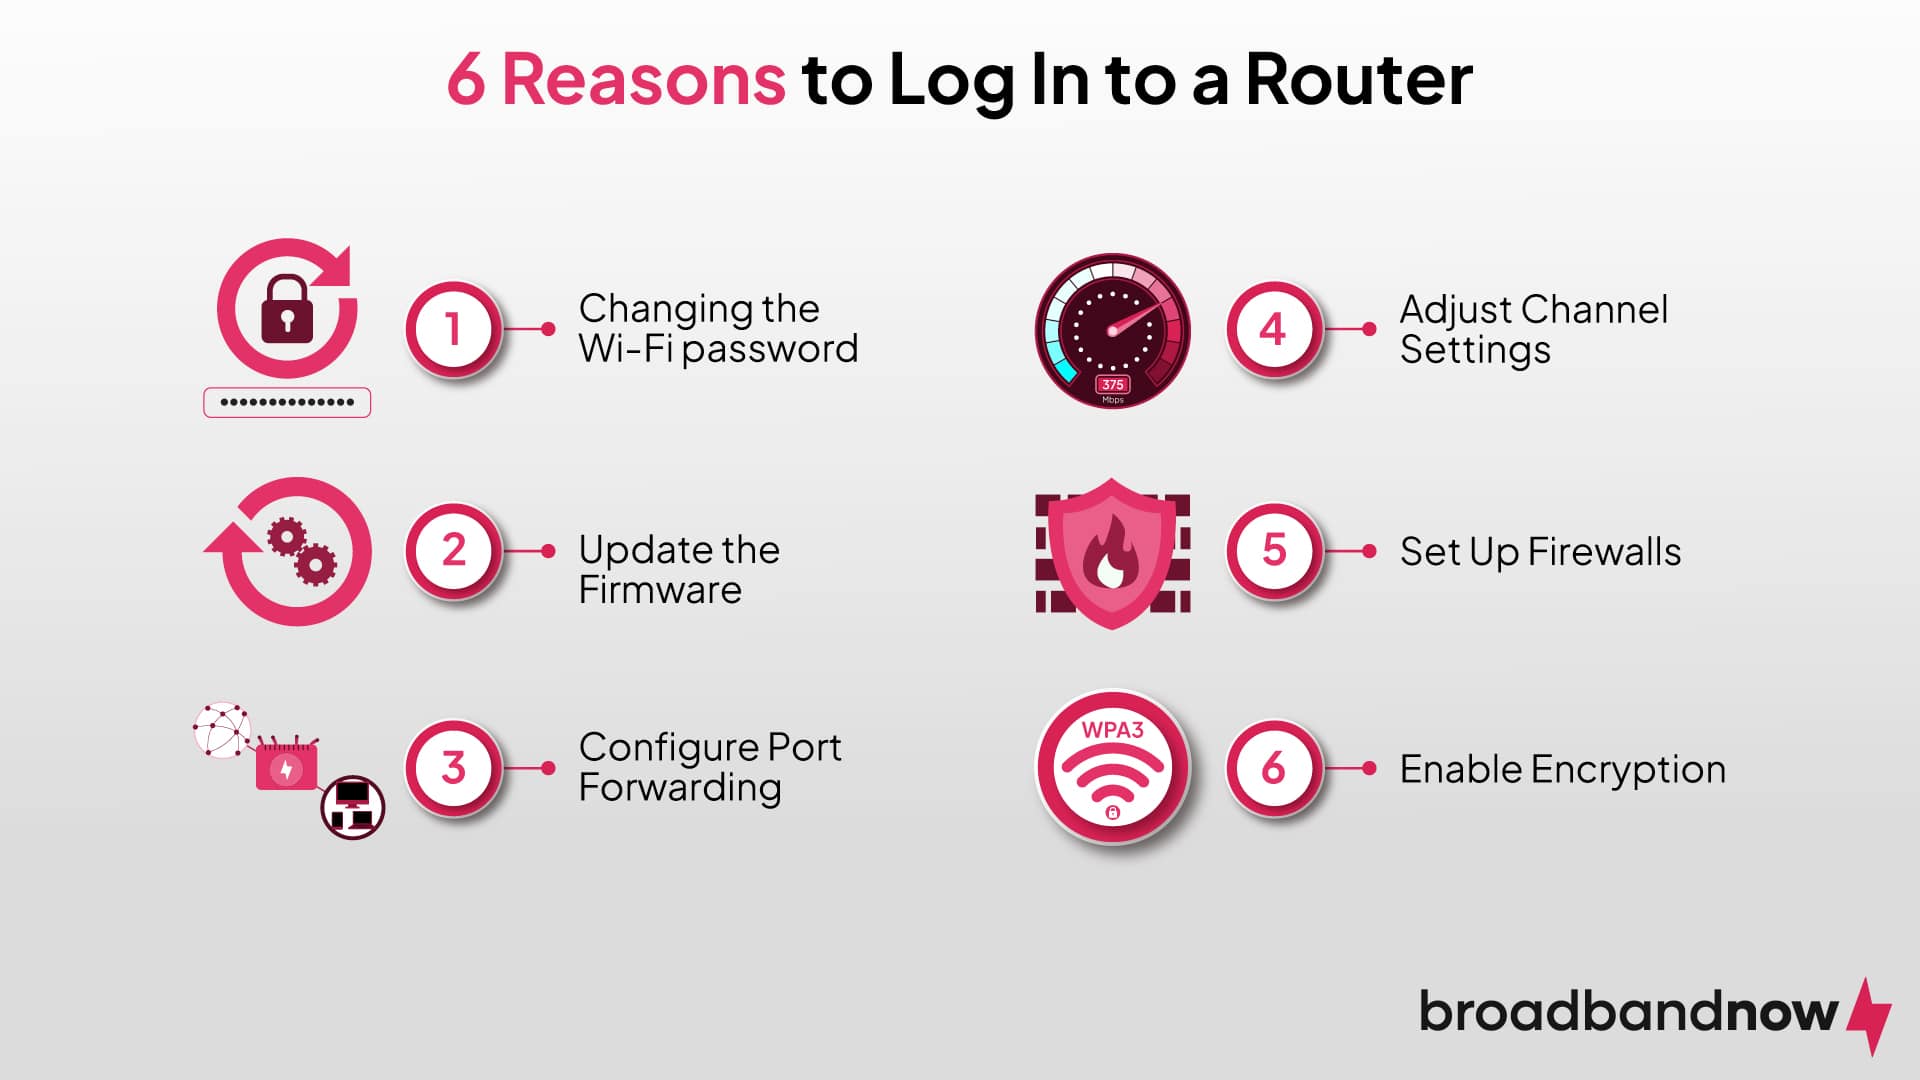 Graphic containing details about the importance of logging in to your router settings